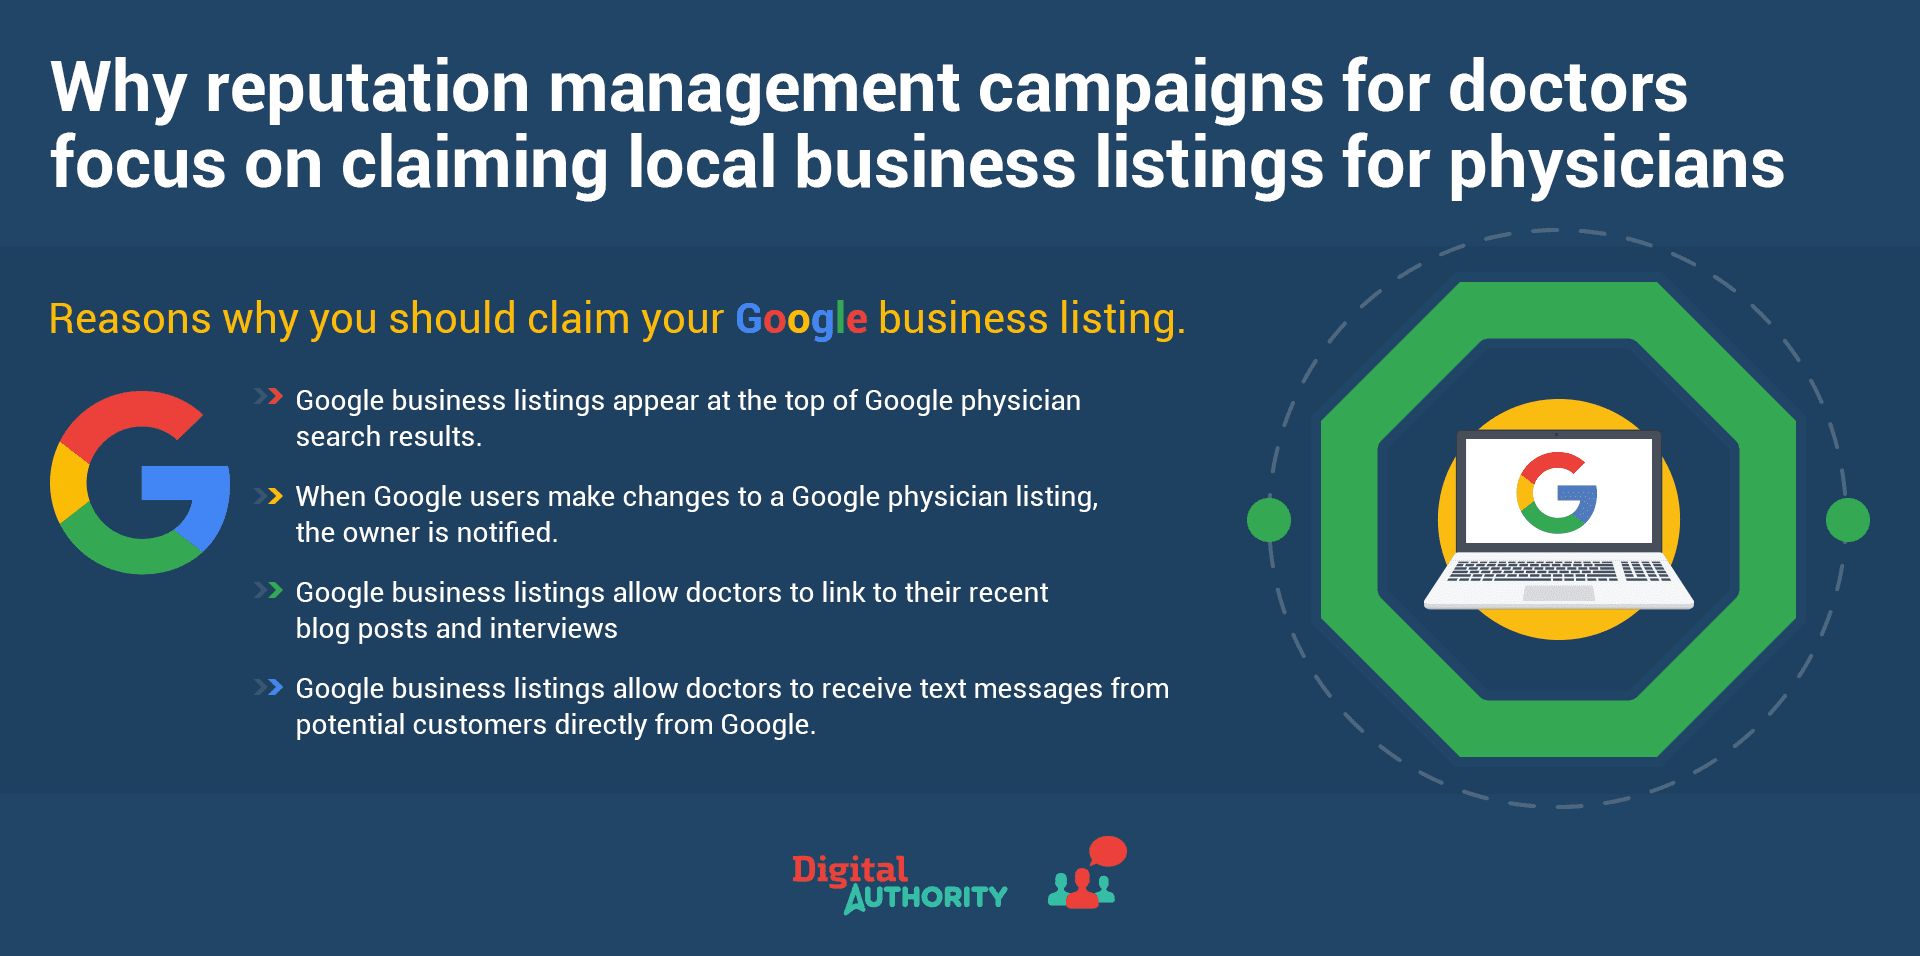 Graphic explaining why reputation management campaigns for doctors focus on claiming local business listings for physicians